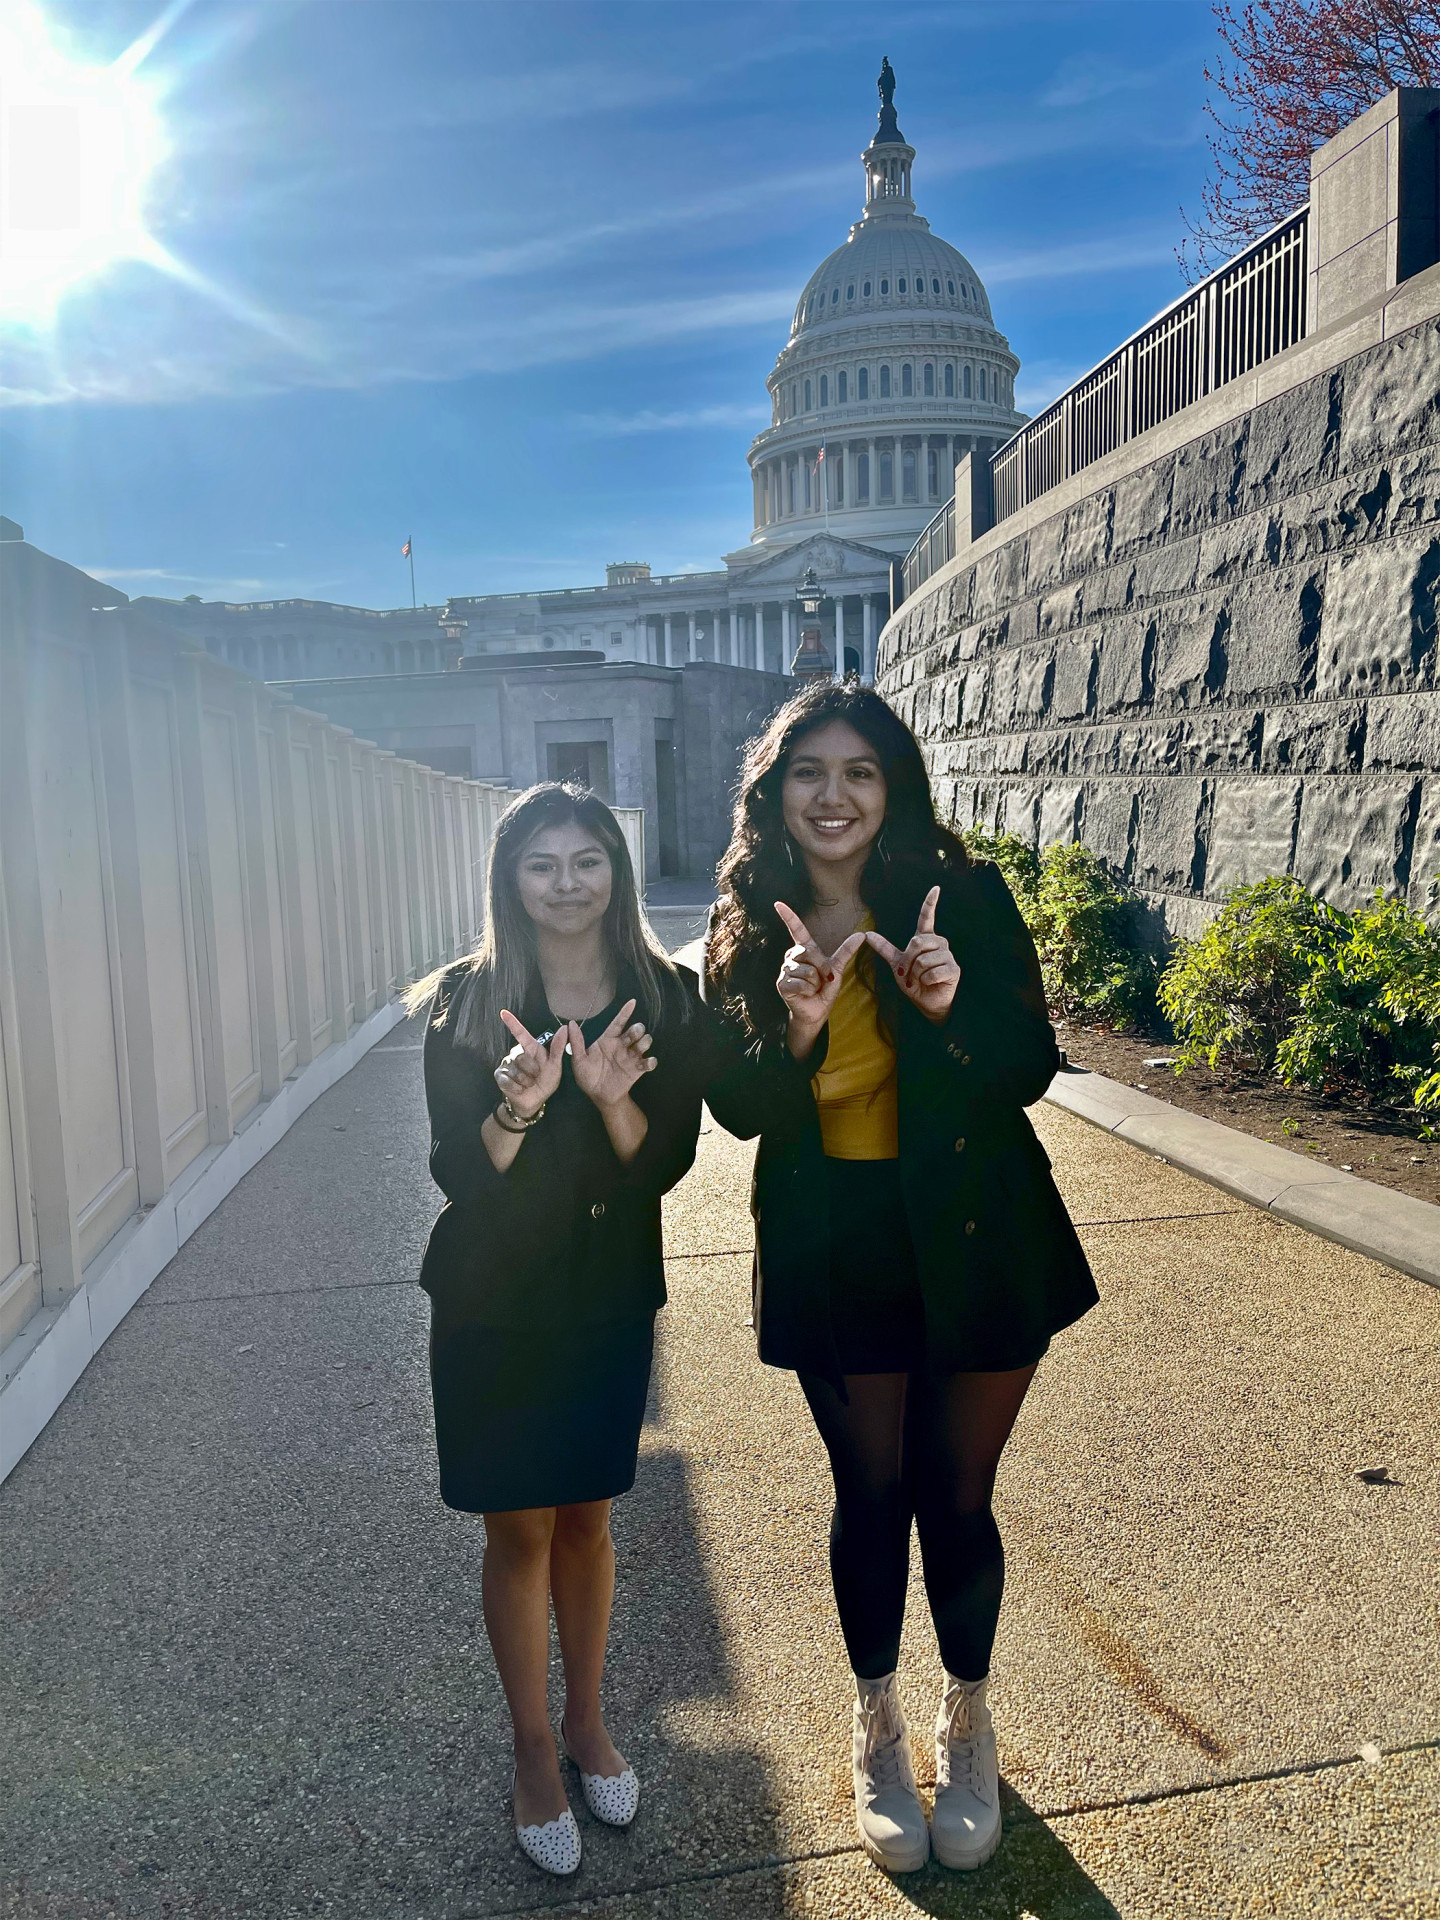 Joana Zuniga and Noemi Mendez pose for a photo in front of the U.S. Capitol.